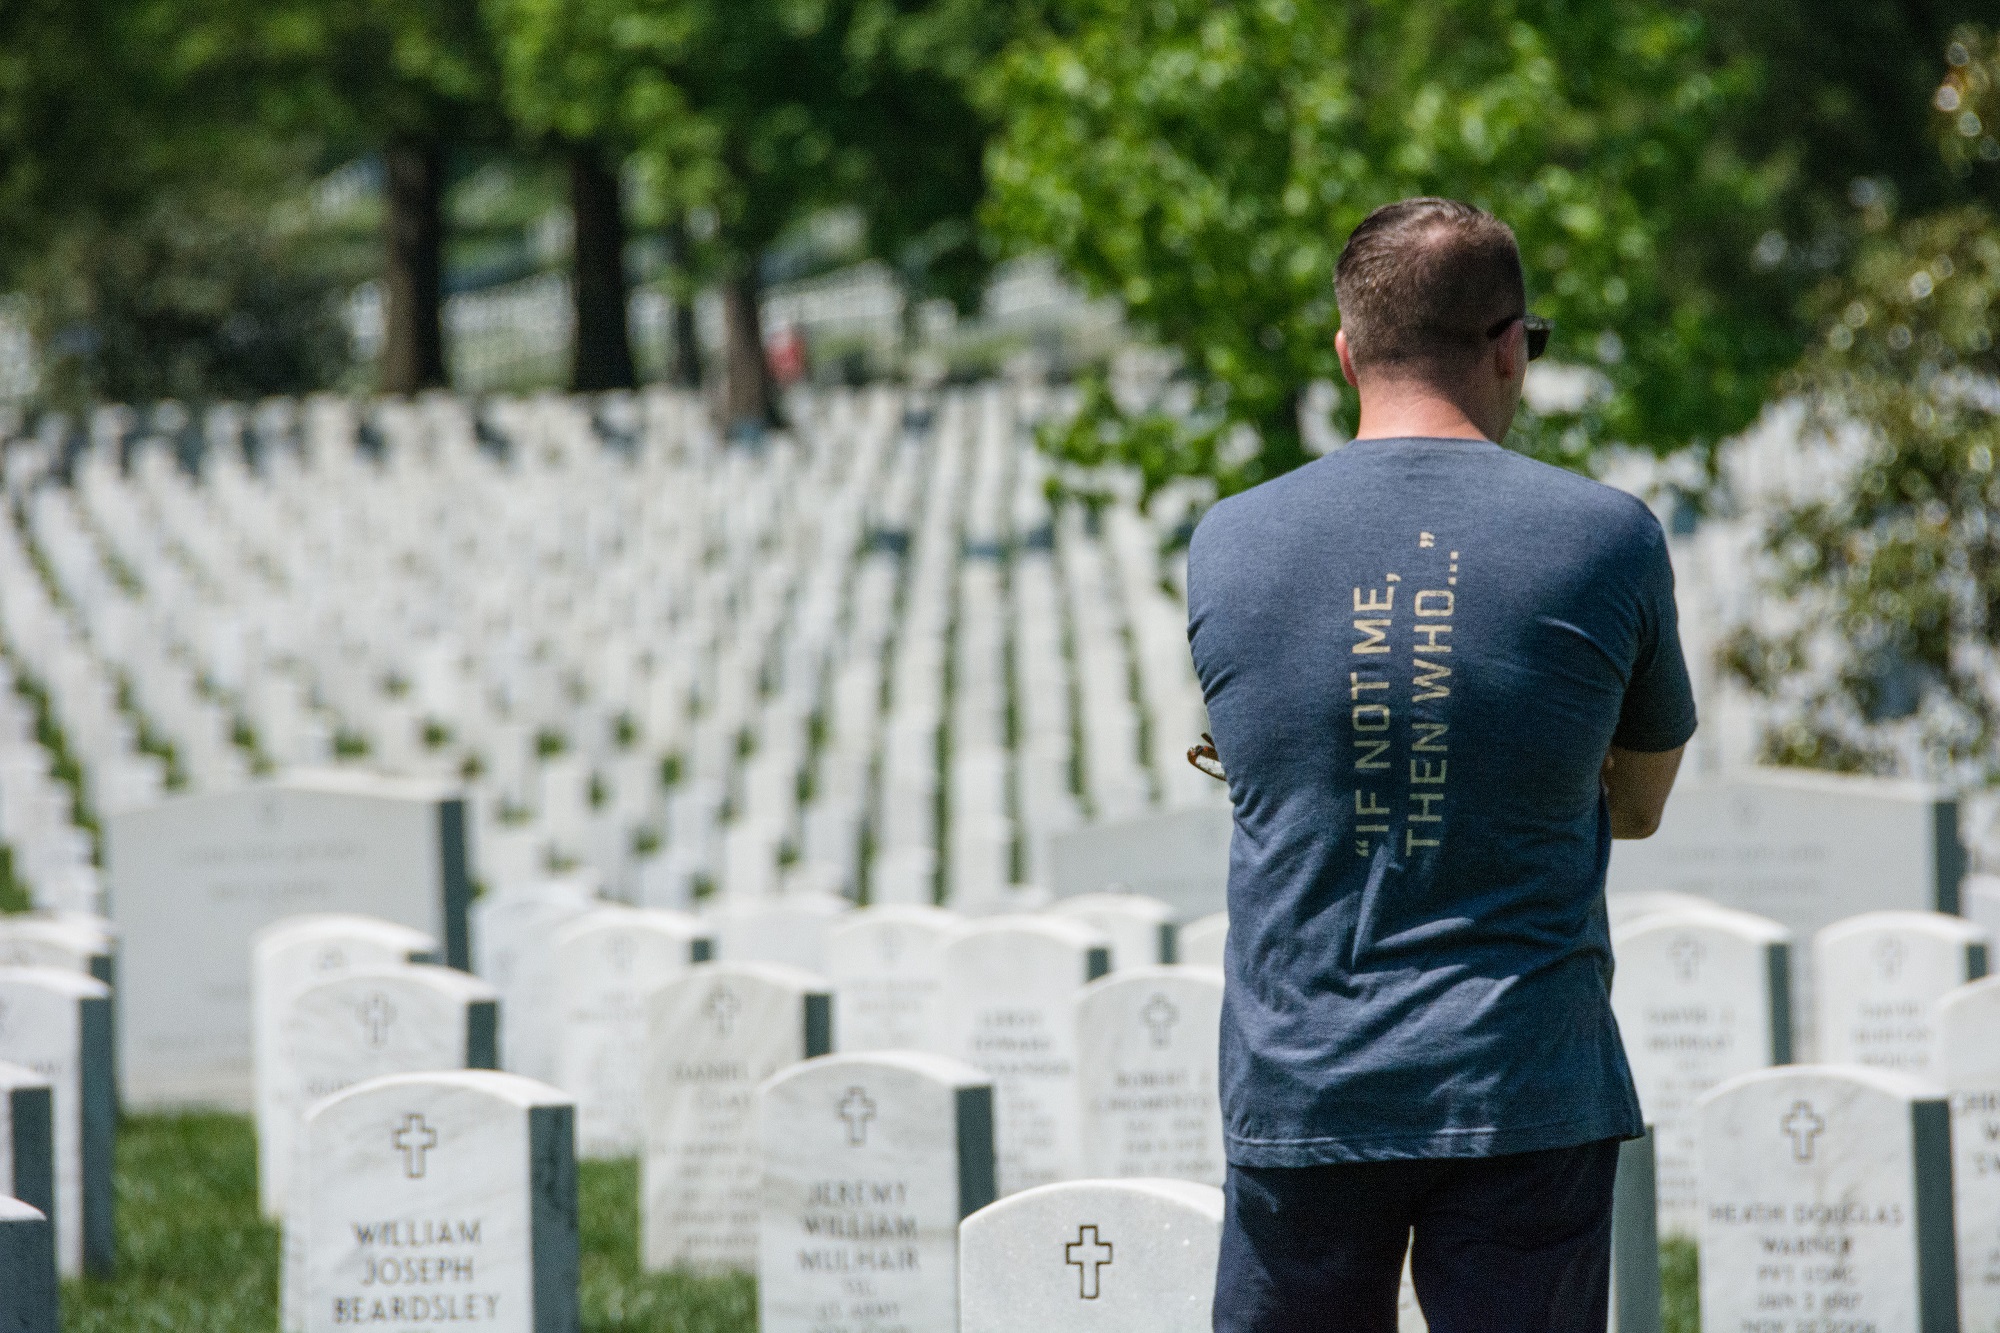 Thinking of those laid to rest in Arlington R3